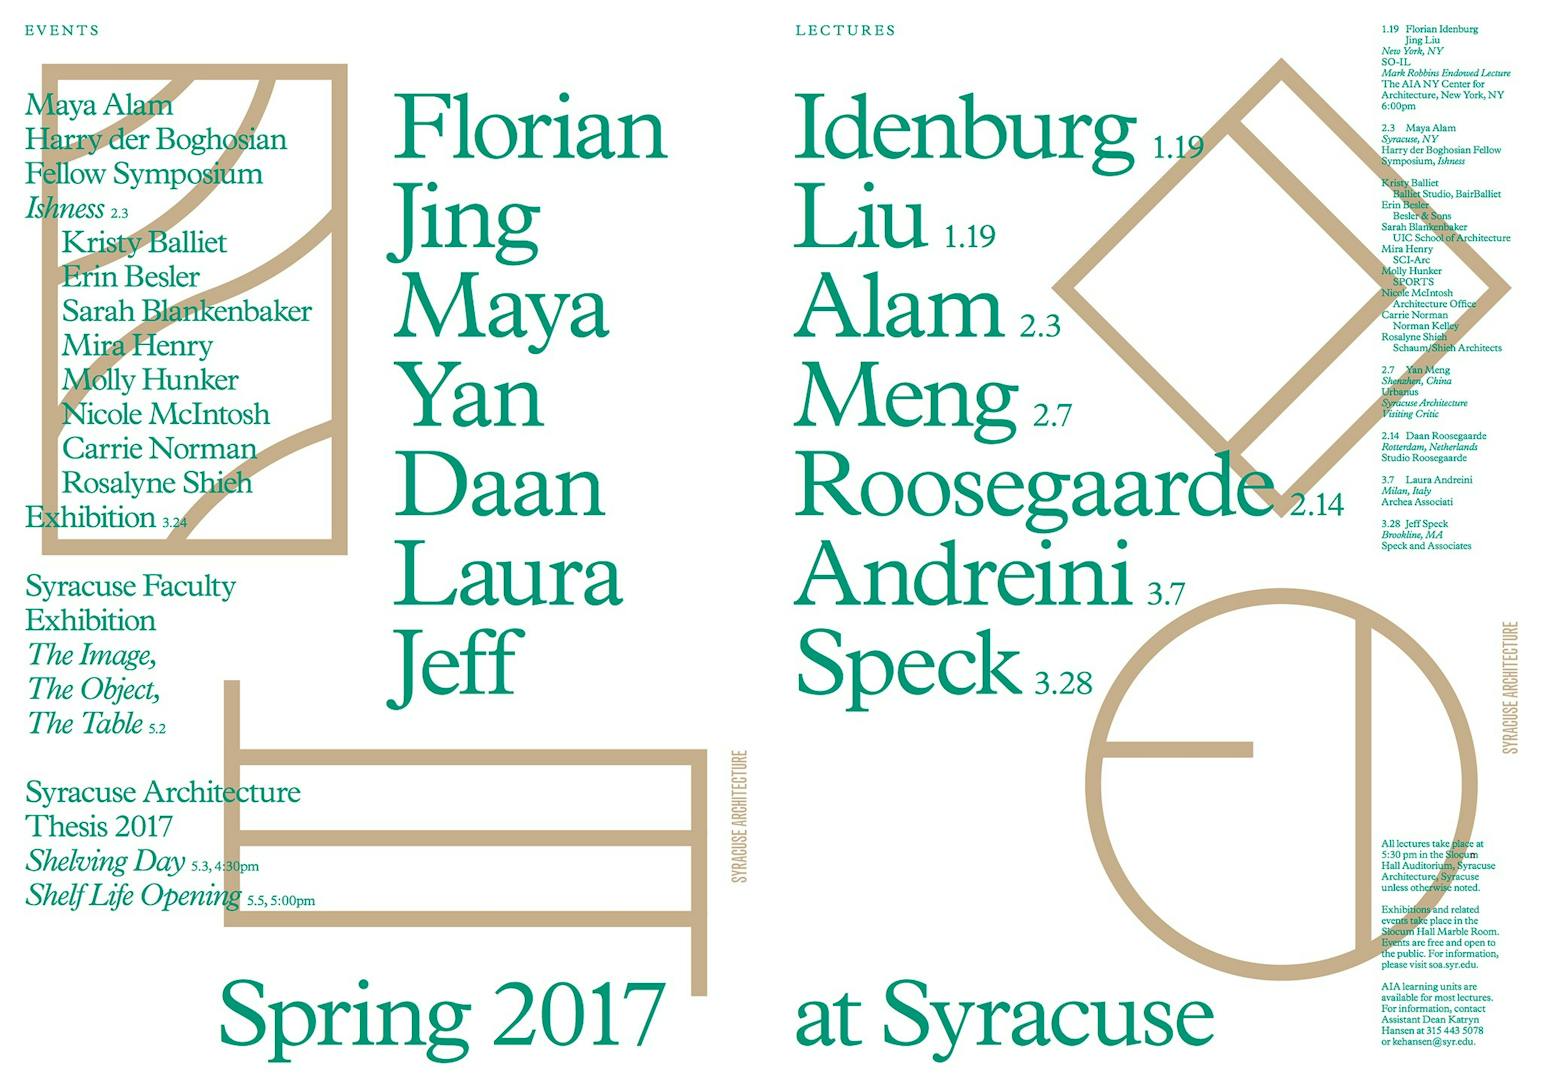 get-lectured-syracuse-university-spring-17-news-archinect